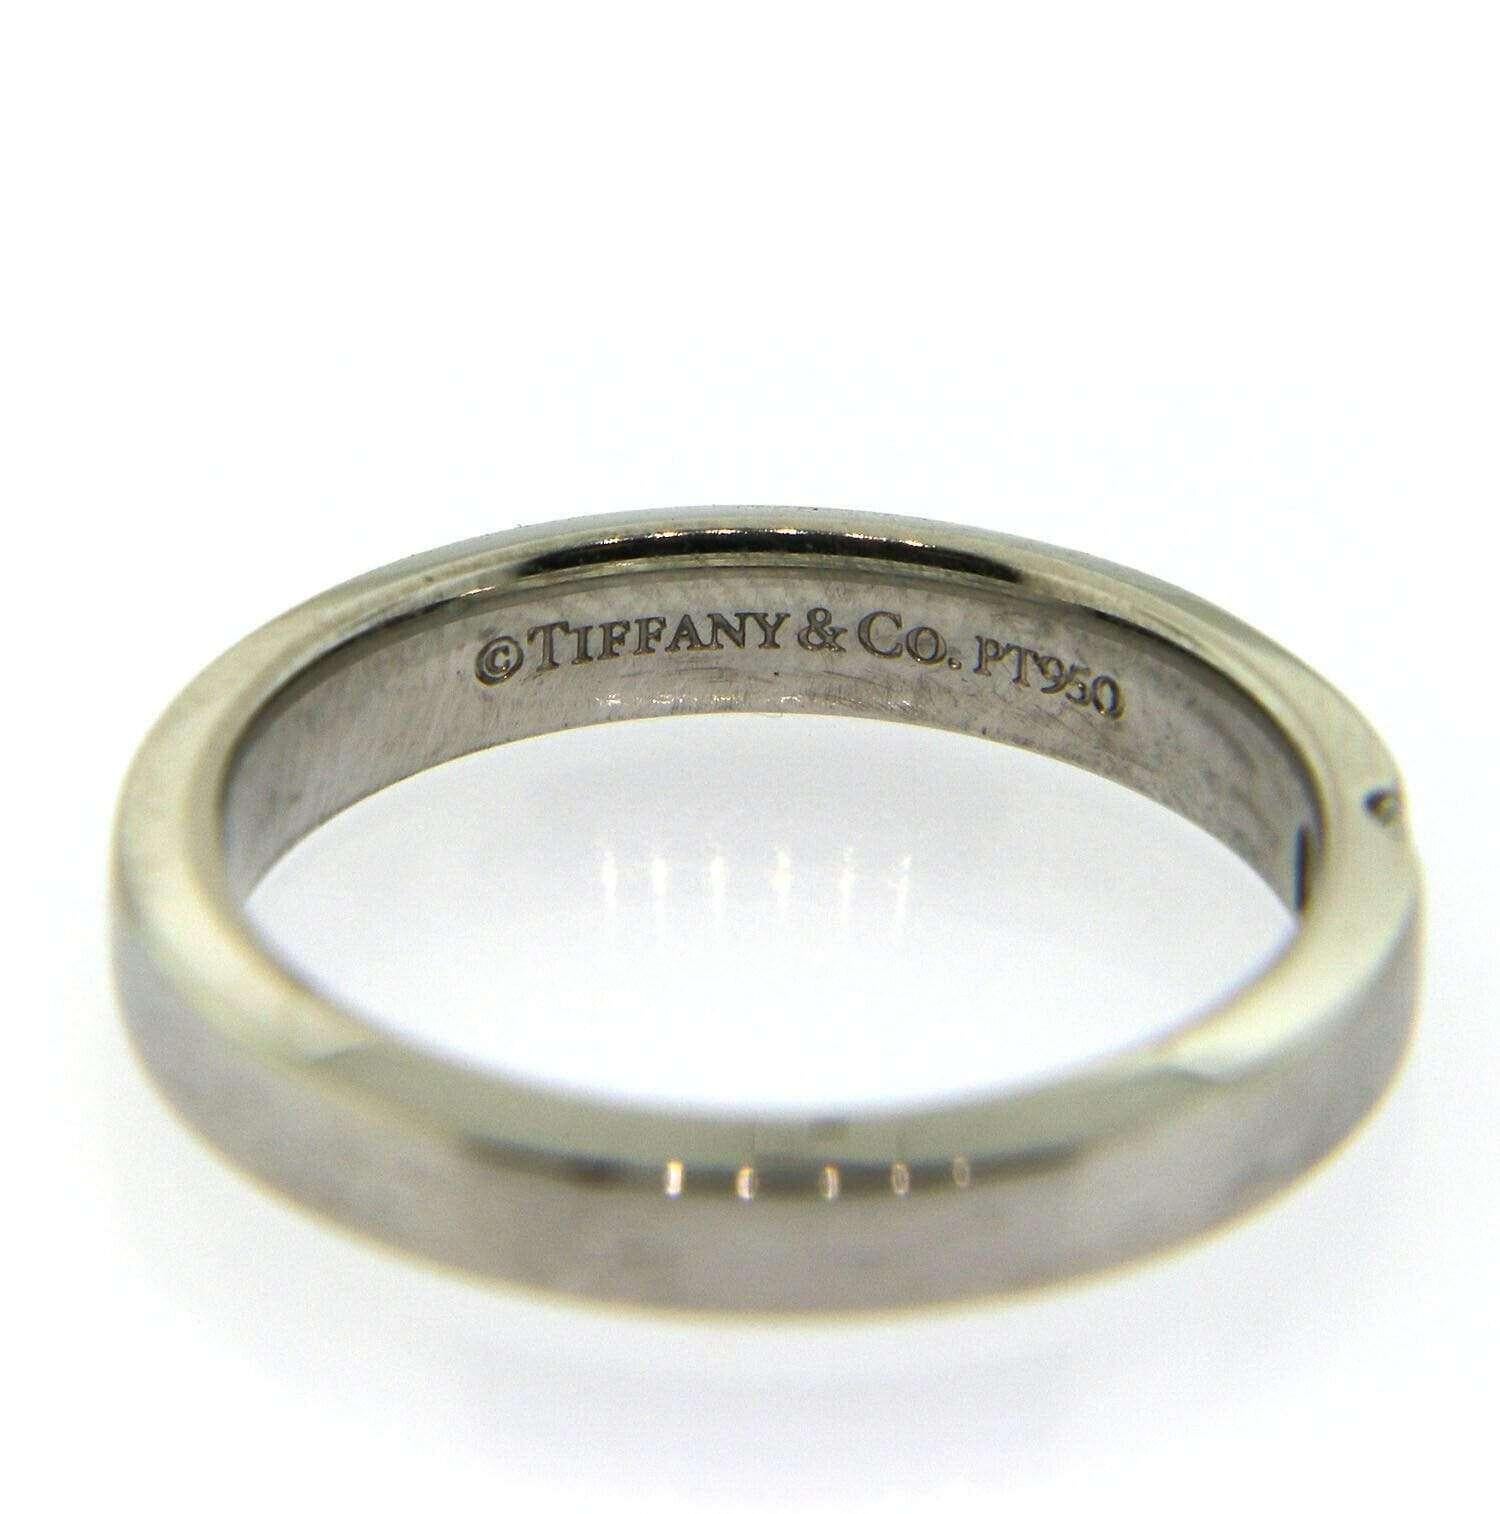 Tiffany & Co Diamond & Platinum Band

Diamond Band
Platinum
Diamond Weight: approx. 0.05 CT
Ring Size: 4.5 (US)
Ring Width: approx. 3.0 MM
Weight: approx. 5.0 Grams
Stamped: © Tiffany & Co, PT950
Condition:

Offered for your consideration is a